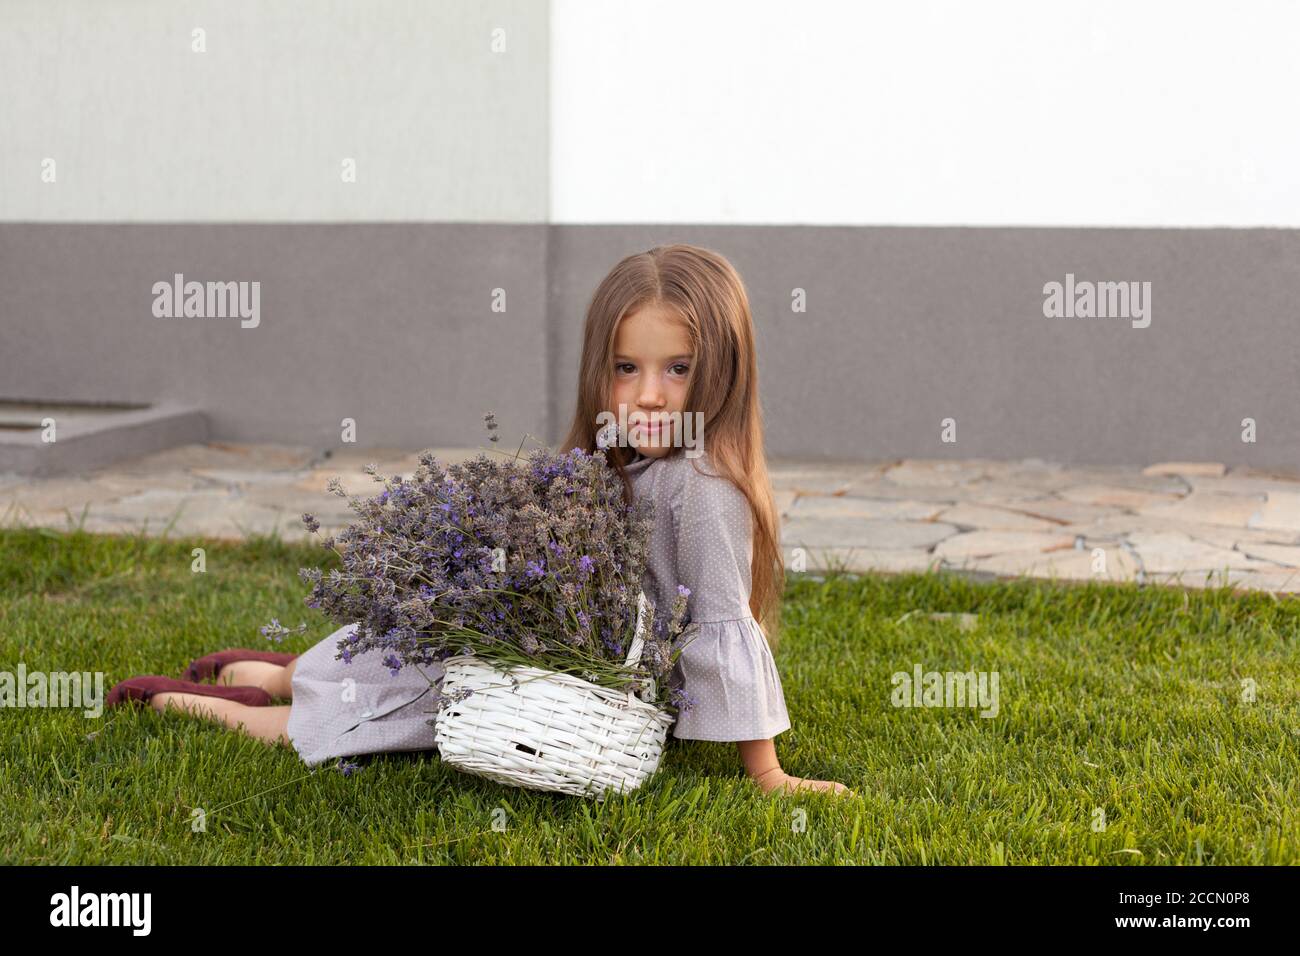 Adorable child in grey dress holding armful of lavender in white basket Stock Photo